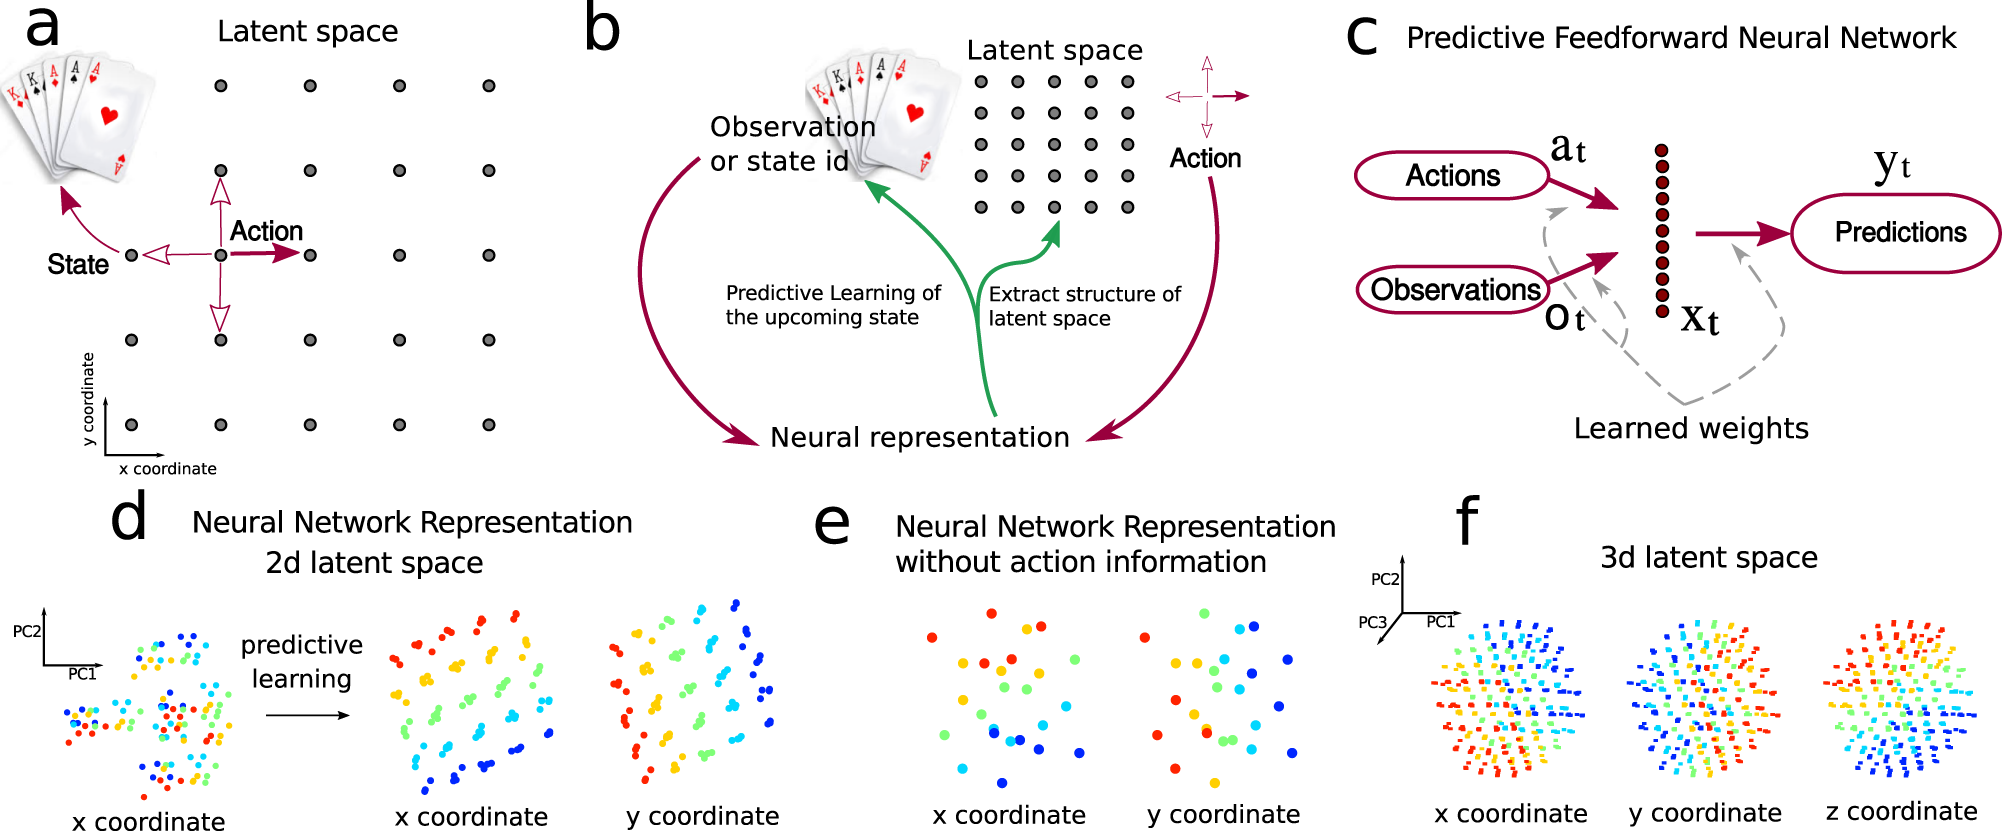 Latent Space. Latent Learning. Latent diffusion Neural Network. Neuron activation.